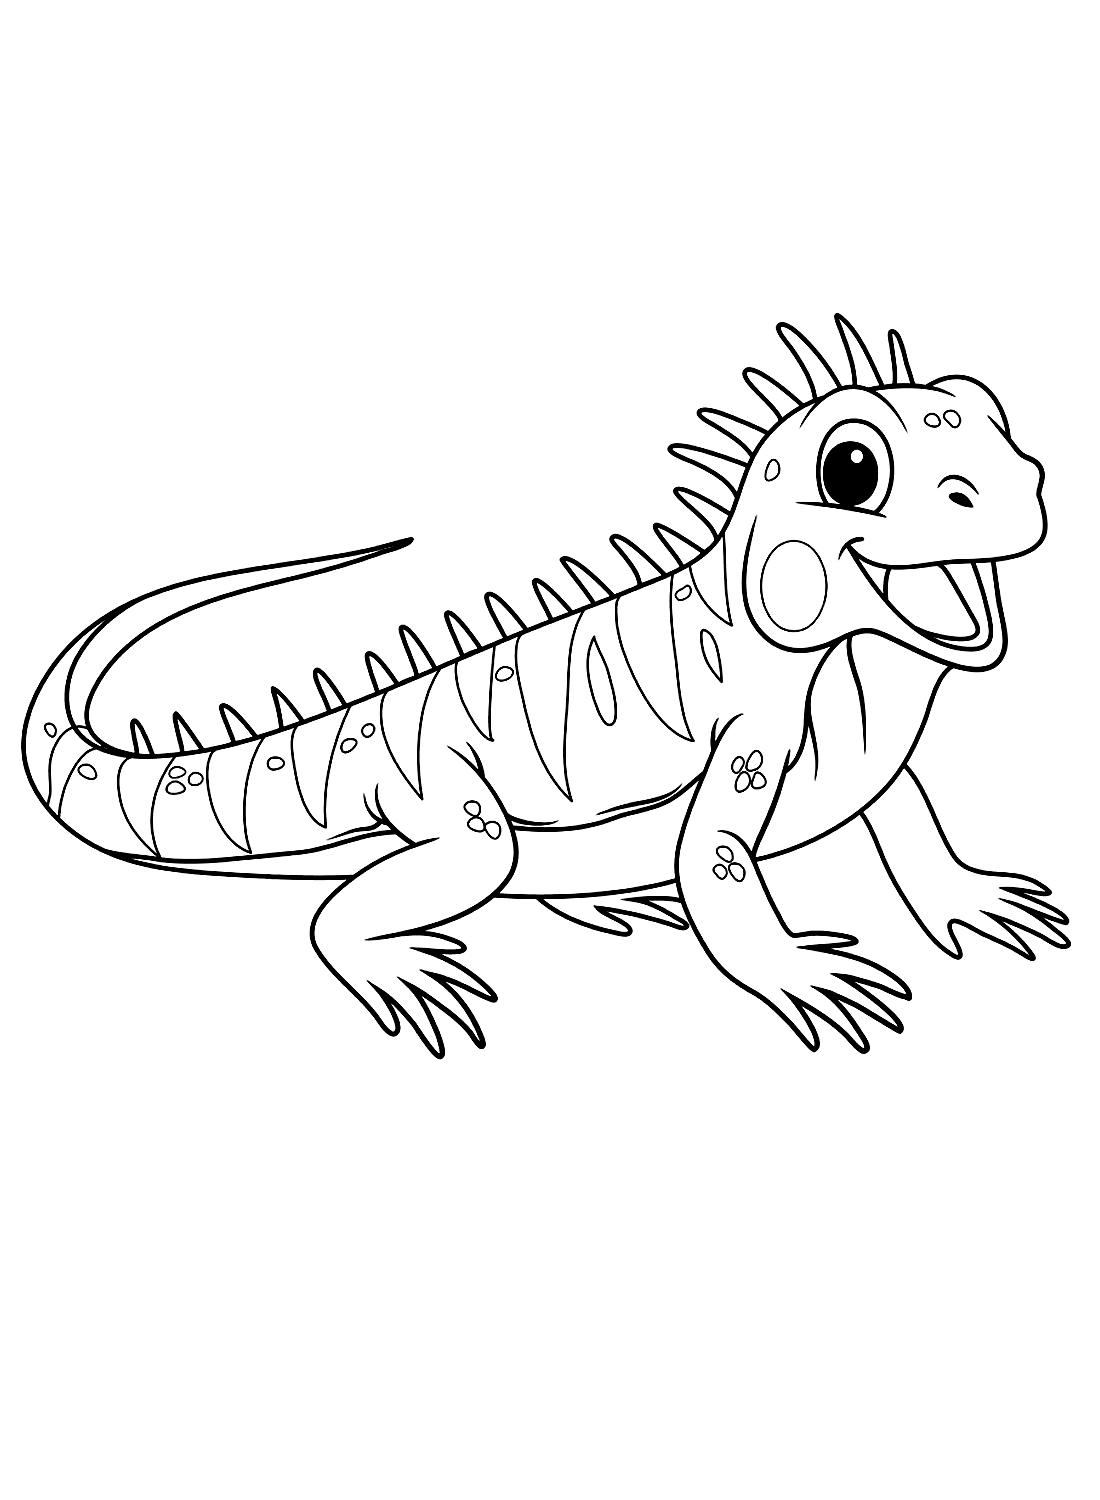 Coloring pages only on x ð free printable lizard coloring sheets ð httpstcoinmrbzuaqz lizard animals reptiles coloringpagesonly coloringpages coloringbook art fanart sketch drawing draw coloring usa trend trending trendingnow